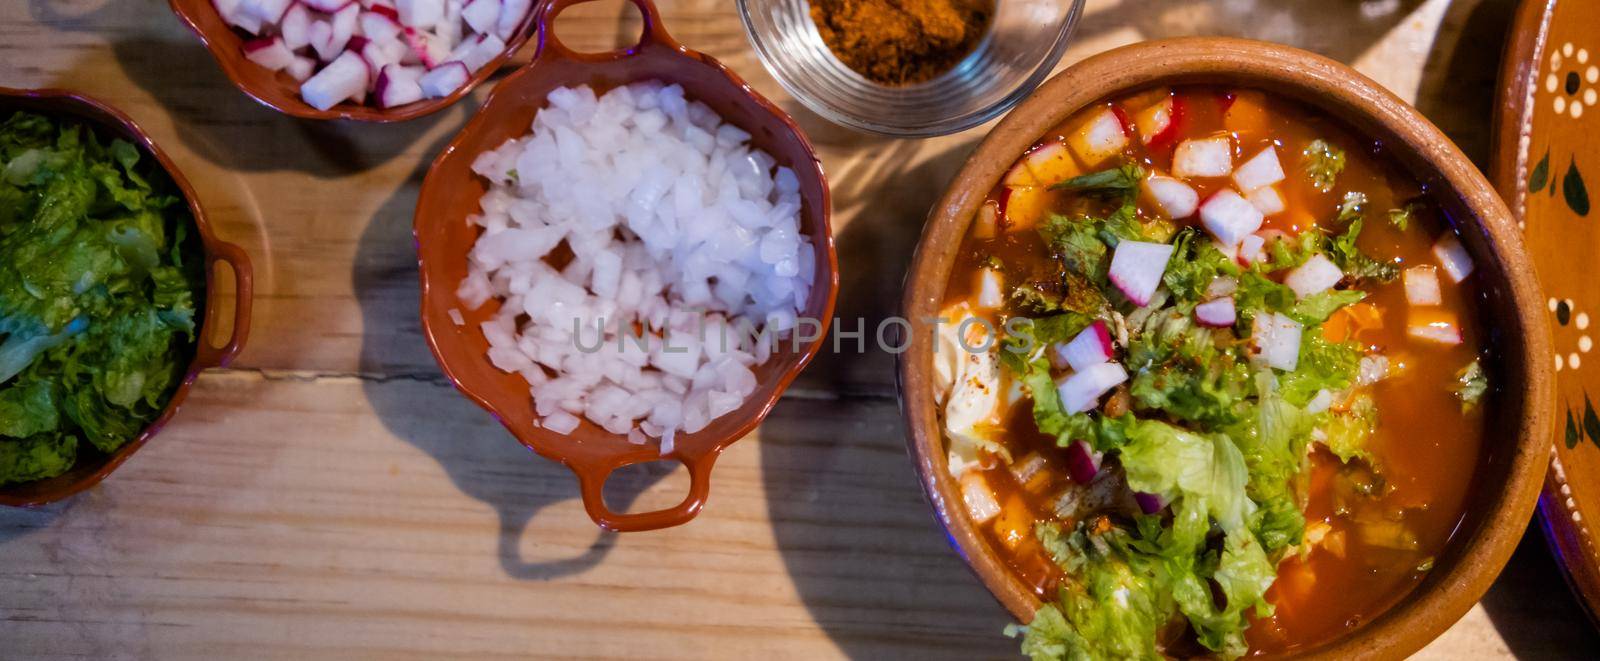 Wide view of bowl of delicious and traditional red pozole, chopped onions, sour cream, and tostadas from above. Authentic Hispanic pork stew and condiments on wooden table. Traditional Mexican cuisine